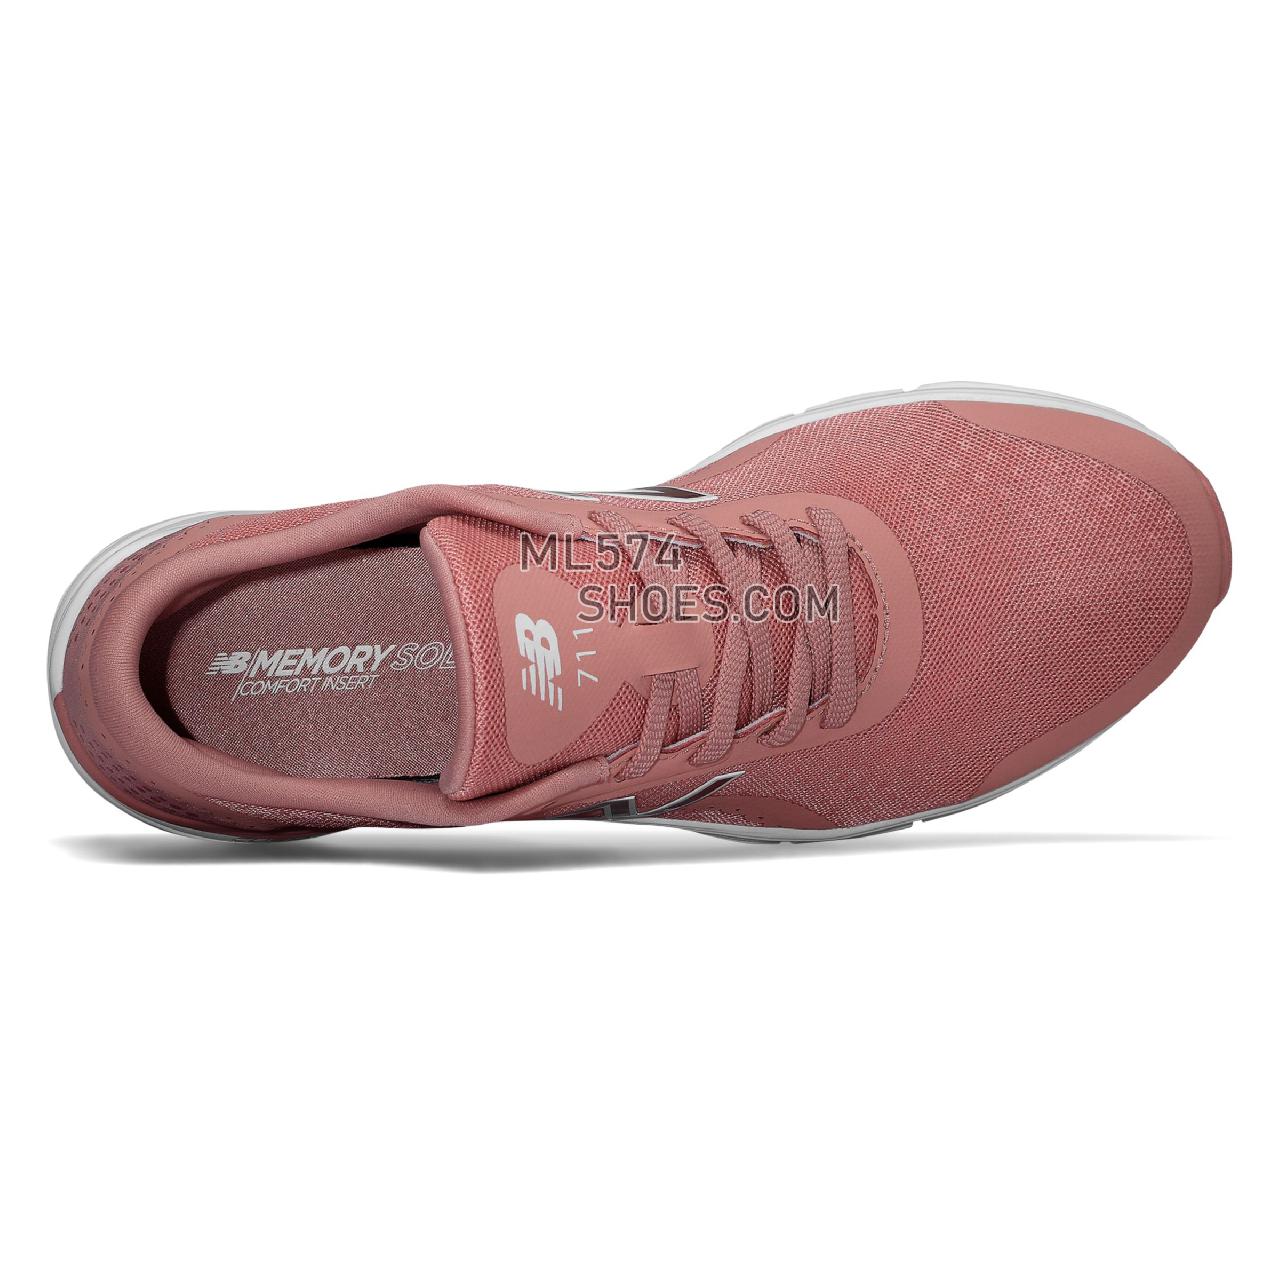 New Balance 711v3 Mesh Trainer - Women's 711v3 Mesh Trainer - Dusted Peach with White - WX711PS3